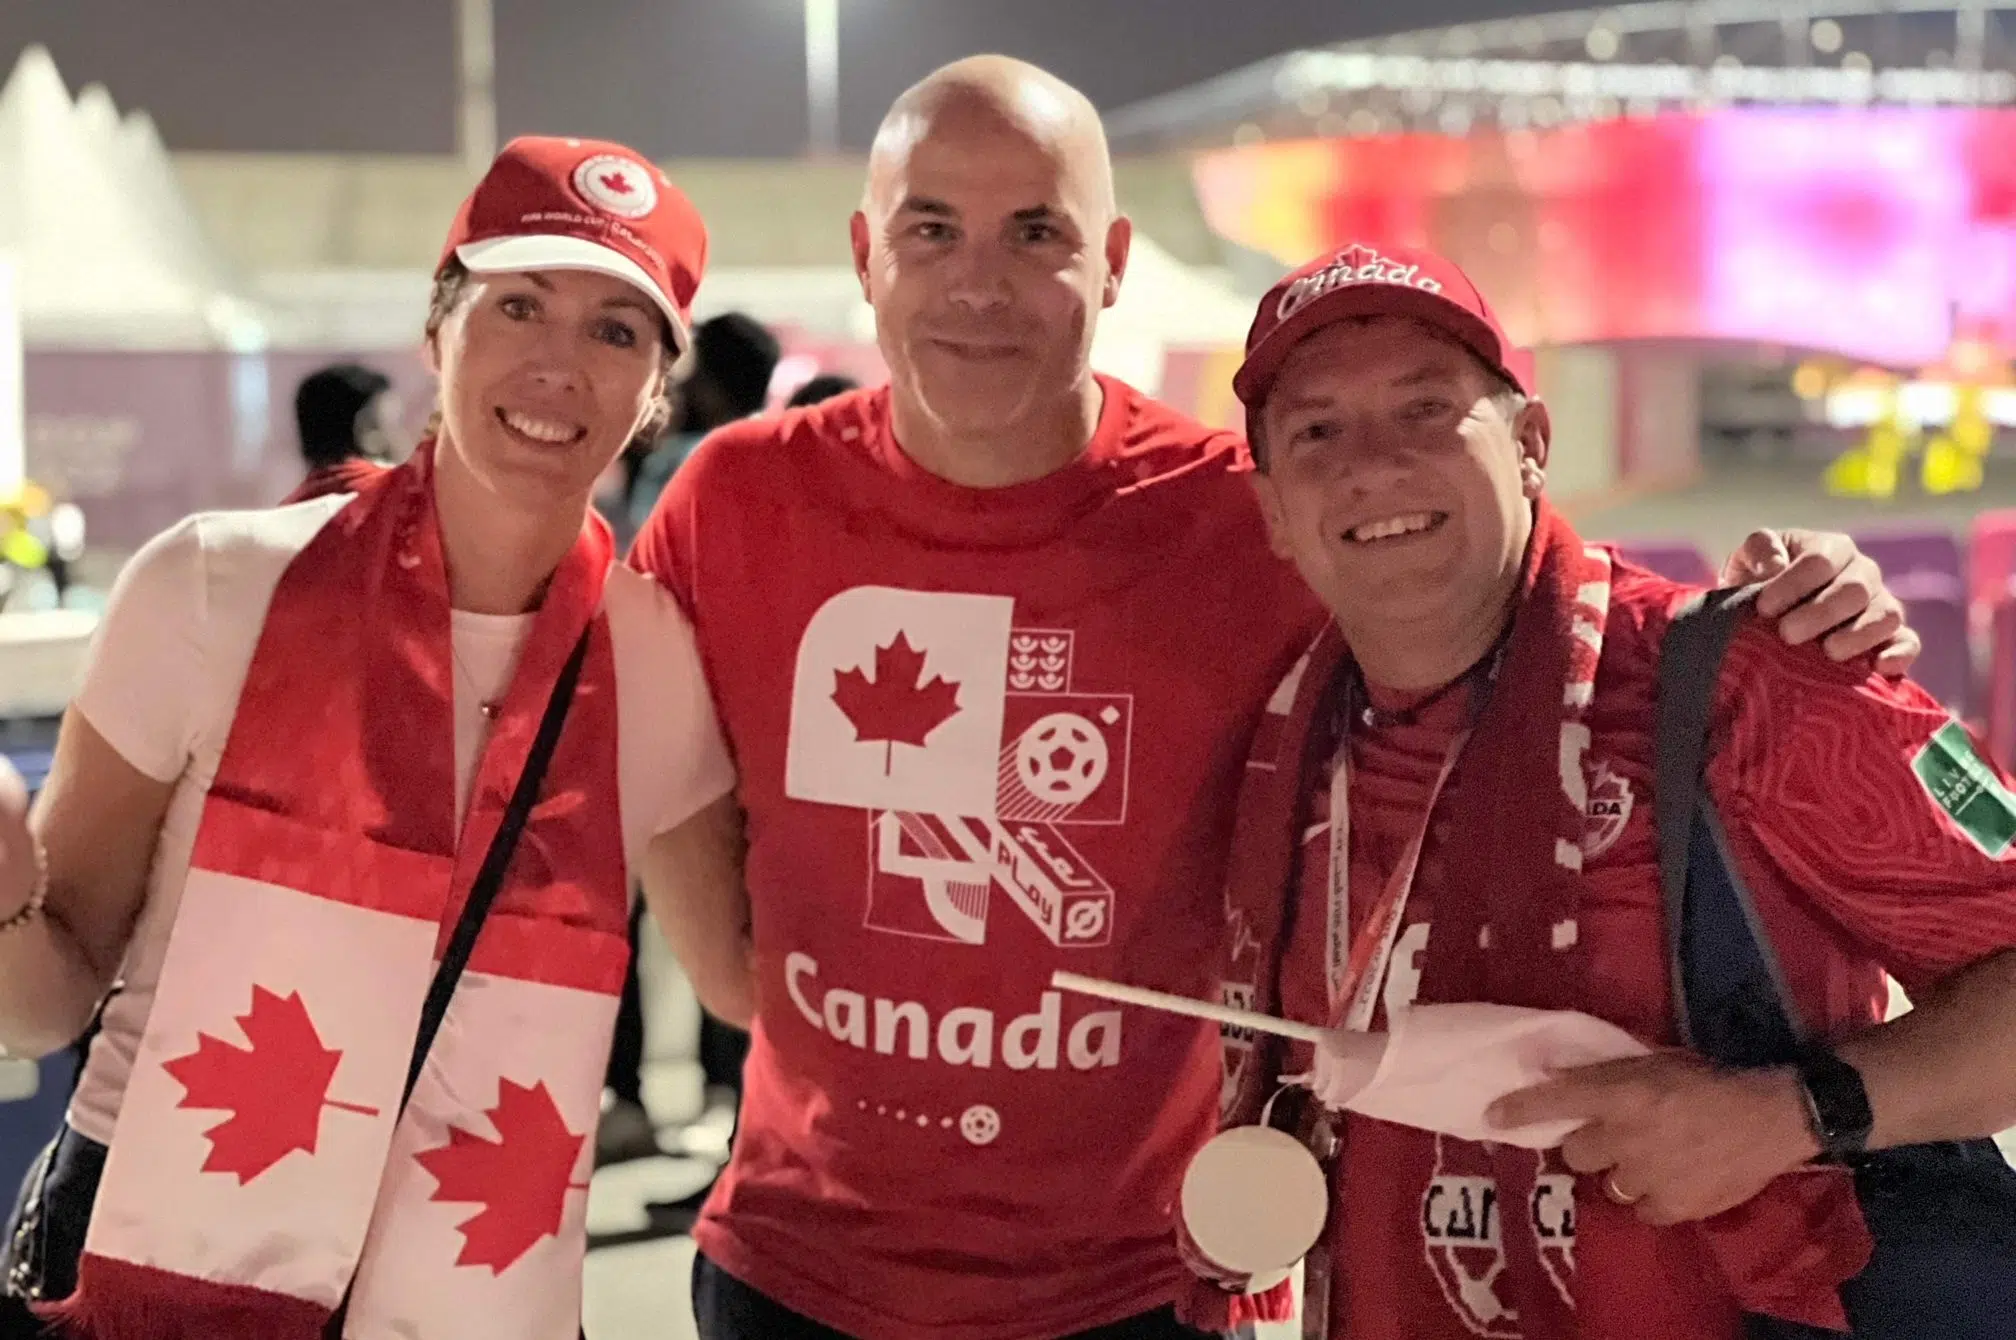 'It was electric:' Canadian fans react to first World Cup match in Qatar